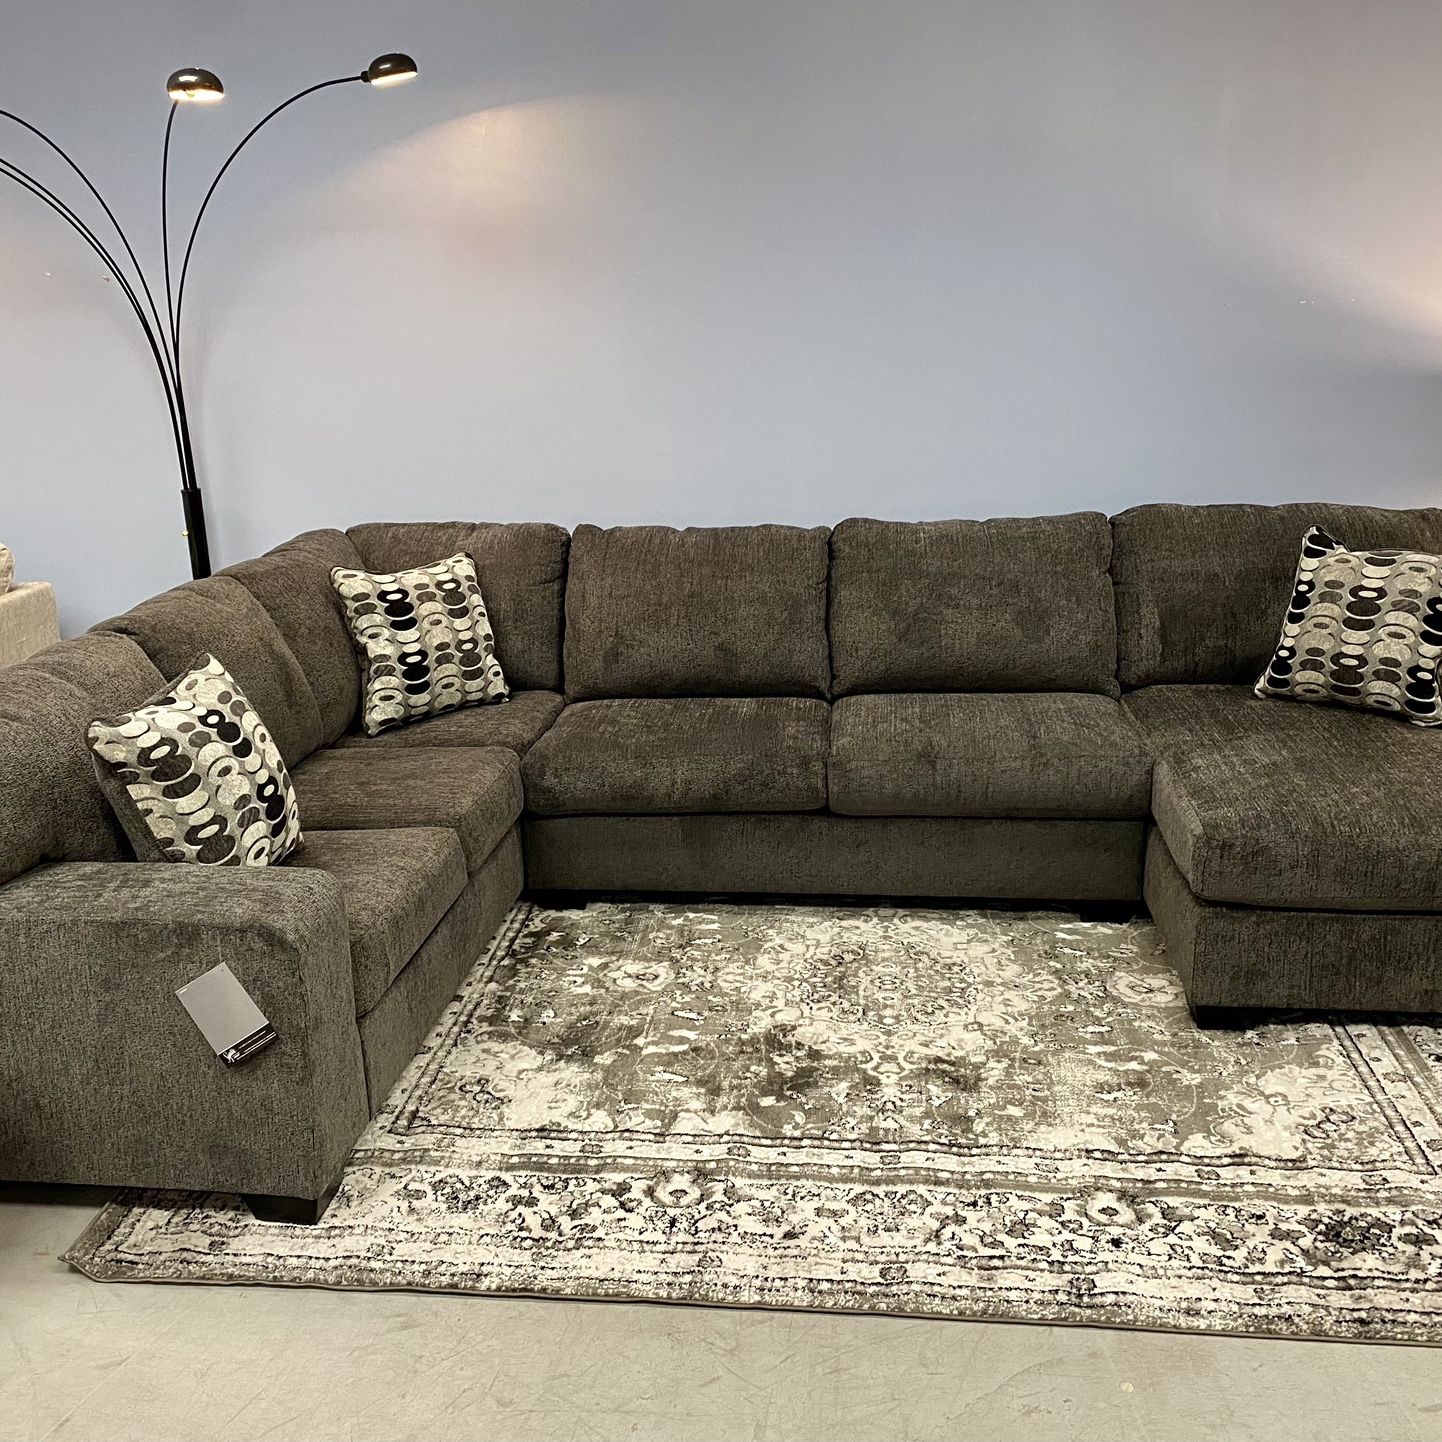 Ballinasloe Modular Sectional, Double Chaise, Living Room Set, Sofa, Loveseat, Couch , Recliner Options